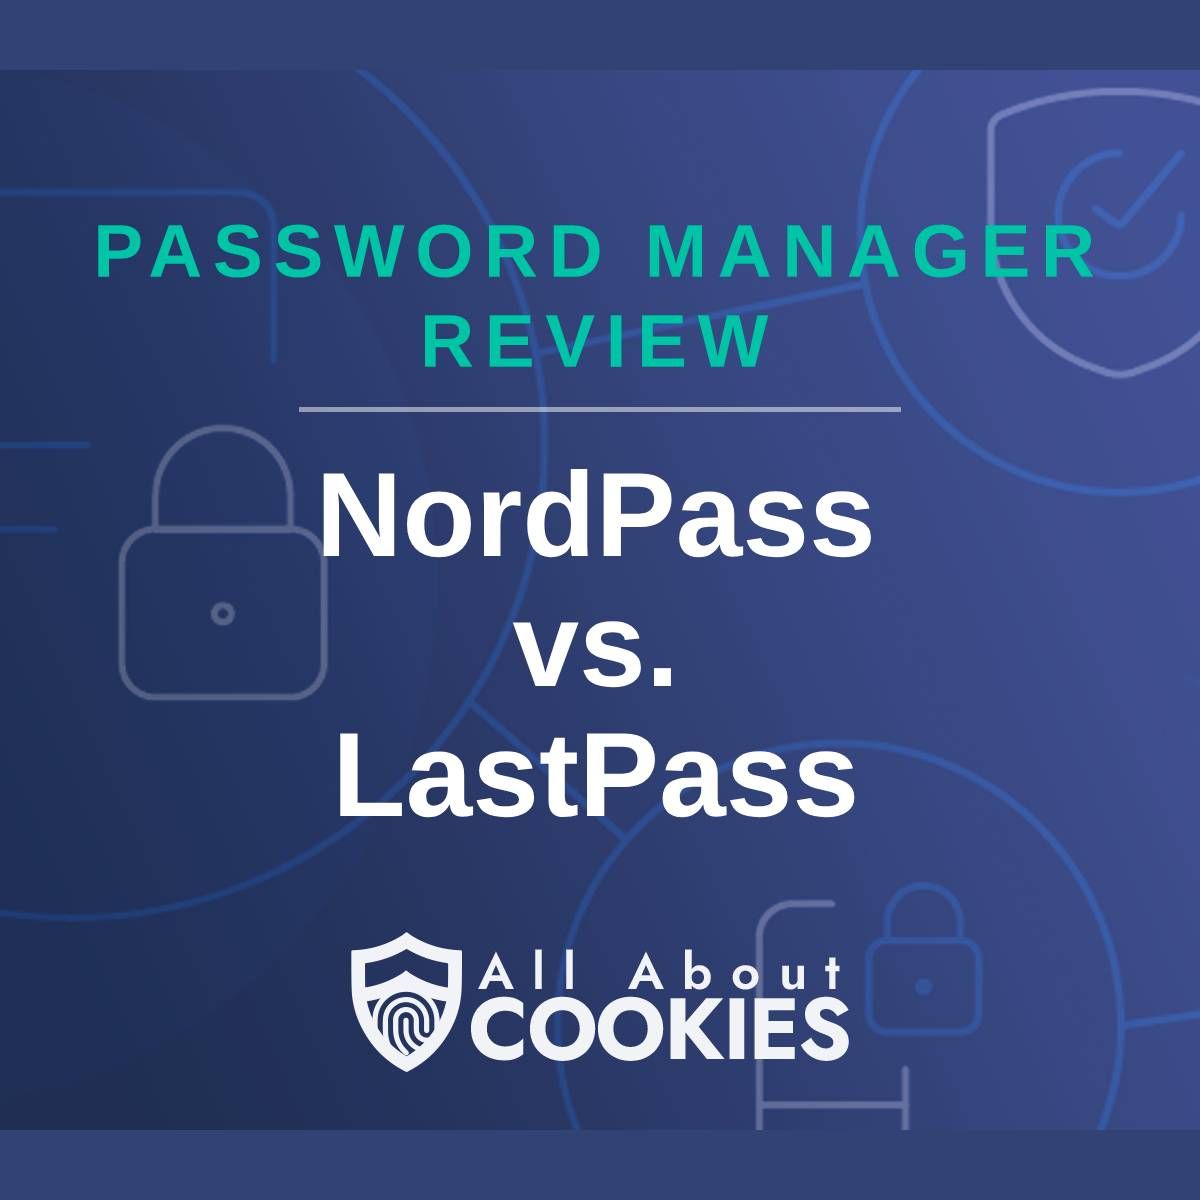 A blue background with images of locks and shields with the text &quot;Password Manager Review NordPass vs. LastPass&quot; and the All About Cookies logo. 